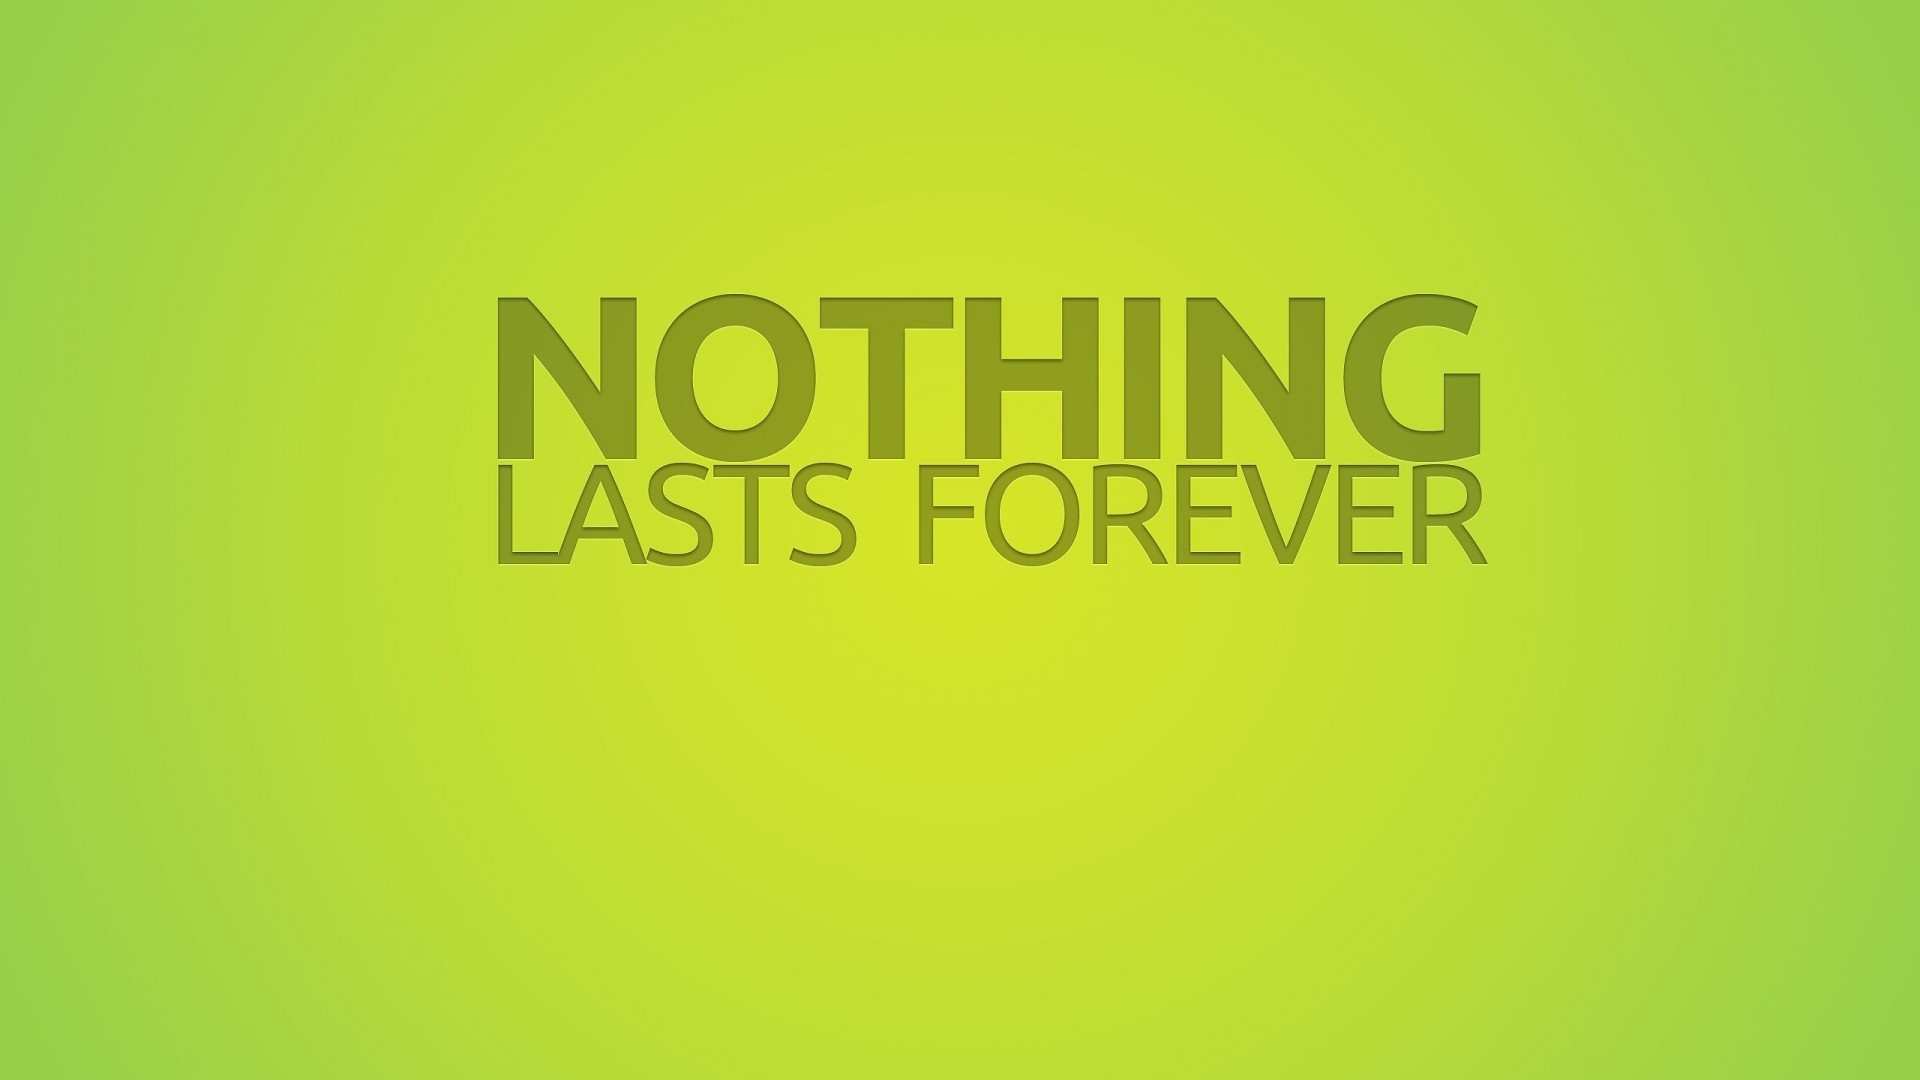 Nothing Lasts Forever for 1920 x 1080 HDTV 1080p resolution